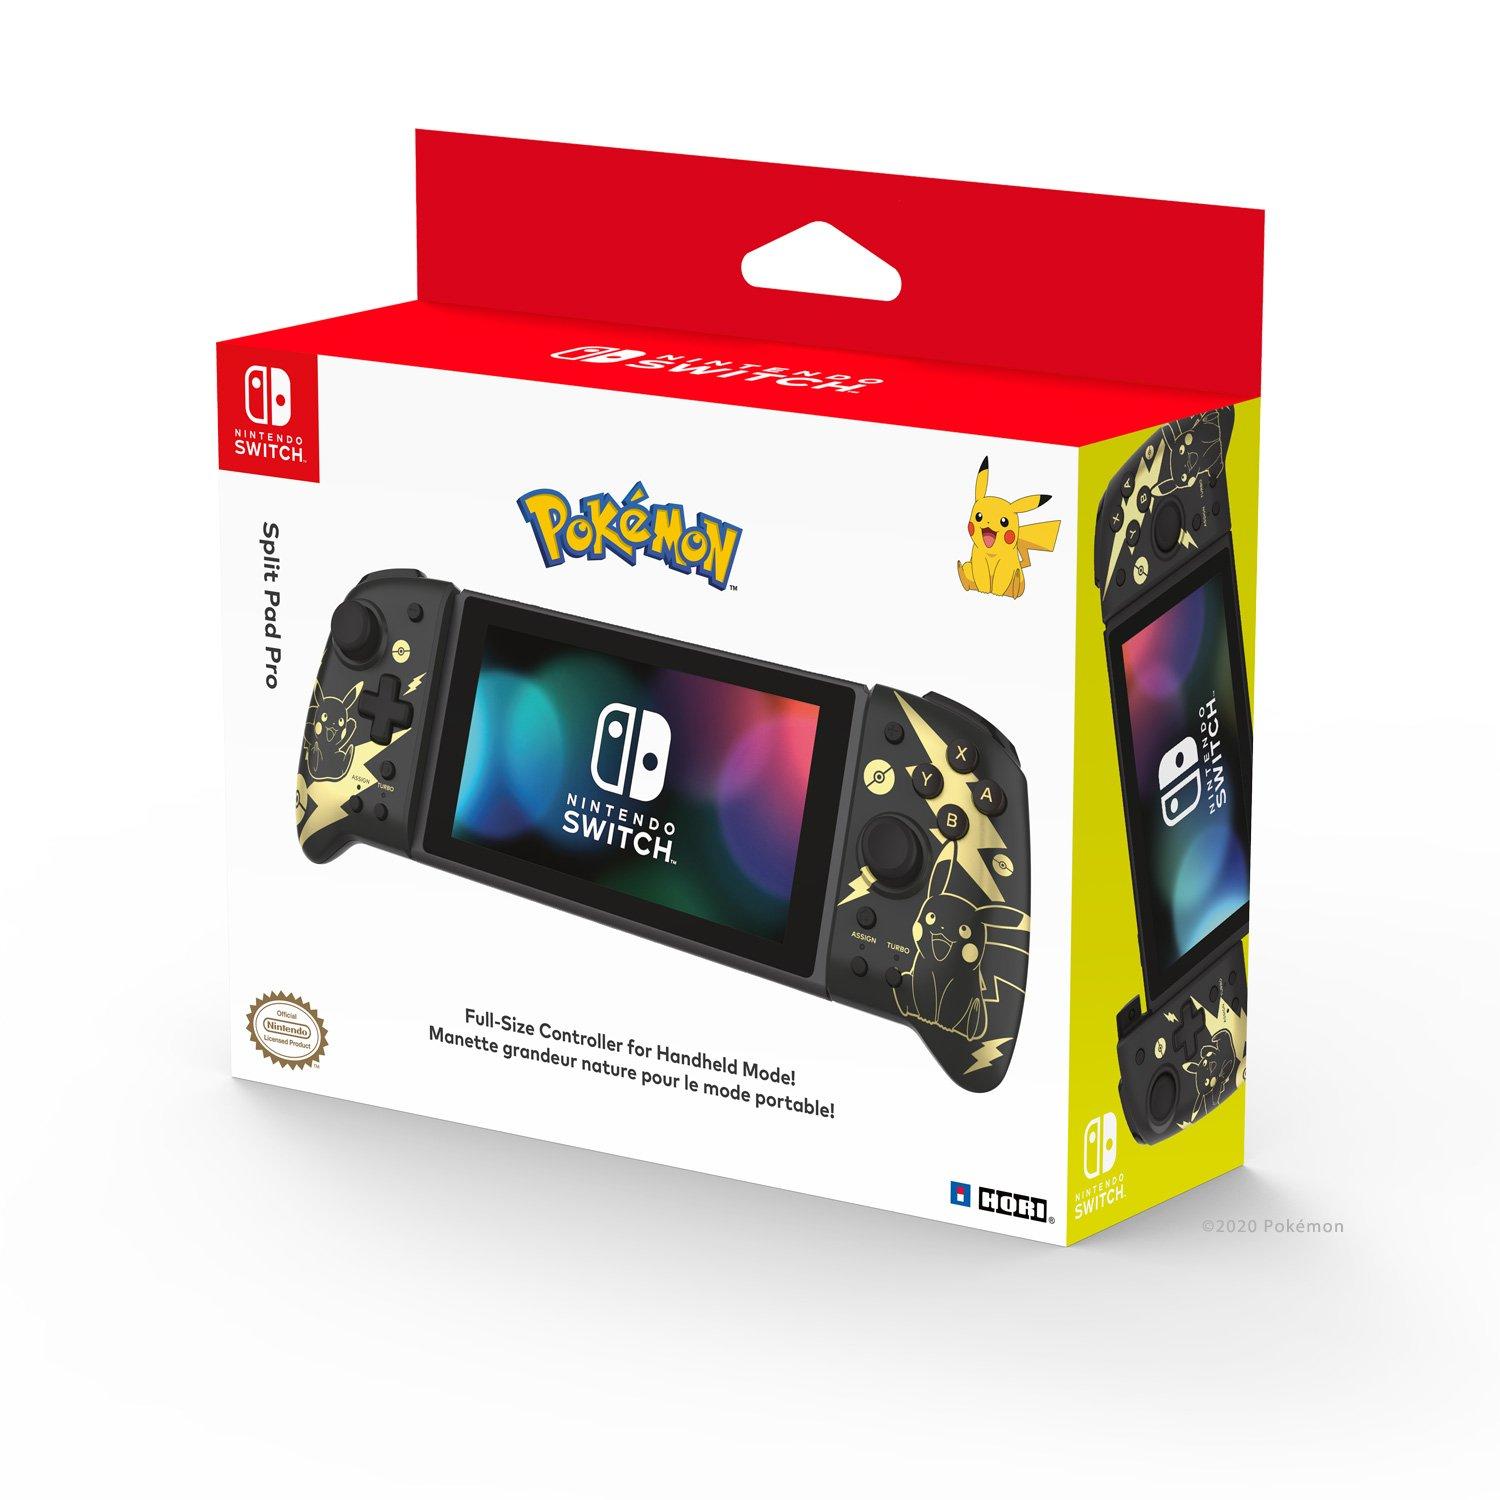 Hori Nintendo Switch D-Pad Controller (L) (Pokemon: Black & Gold Pikachu)  By - Officially Licensed By Nintendo and the Pokemon Company International  